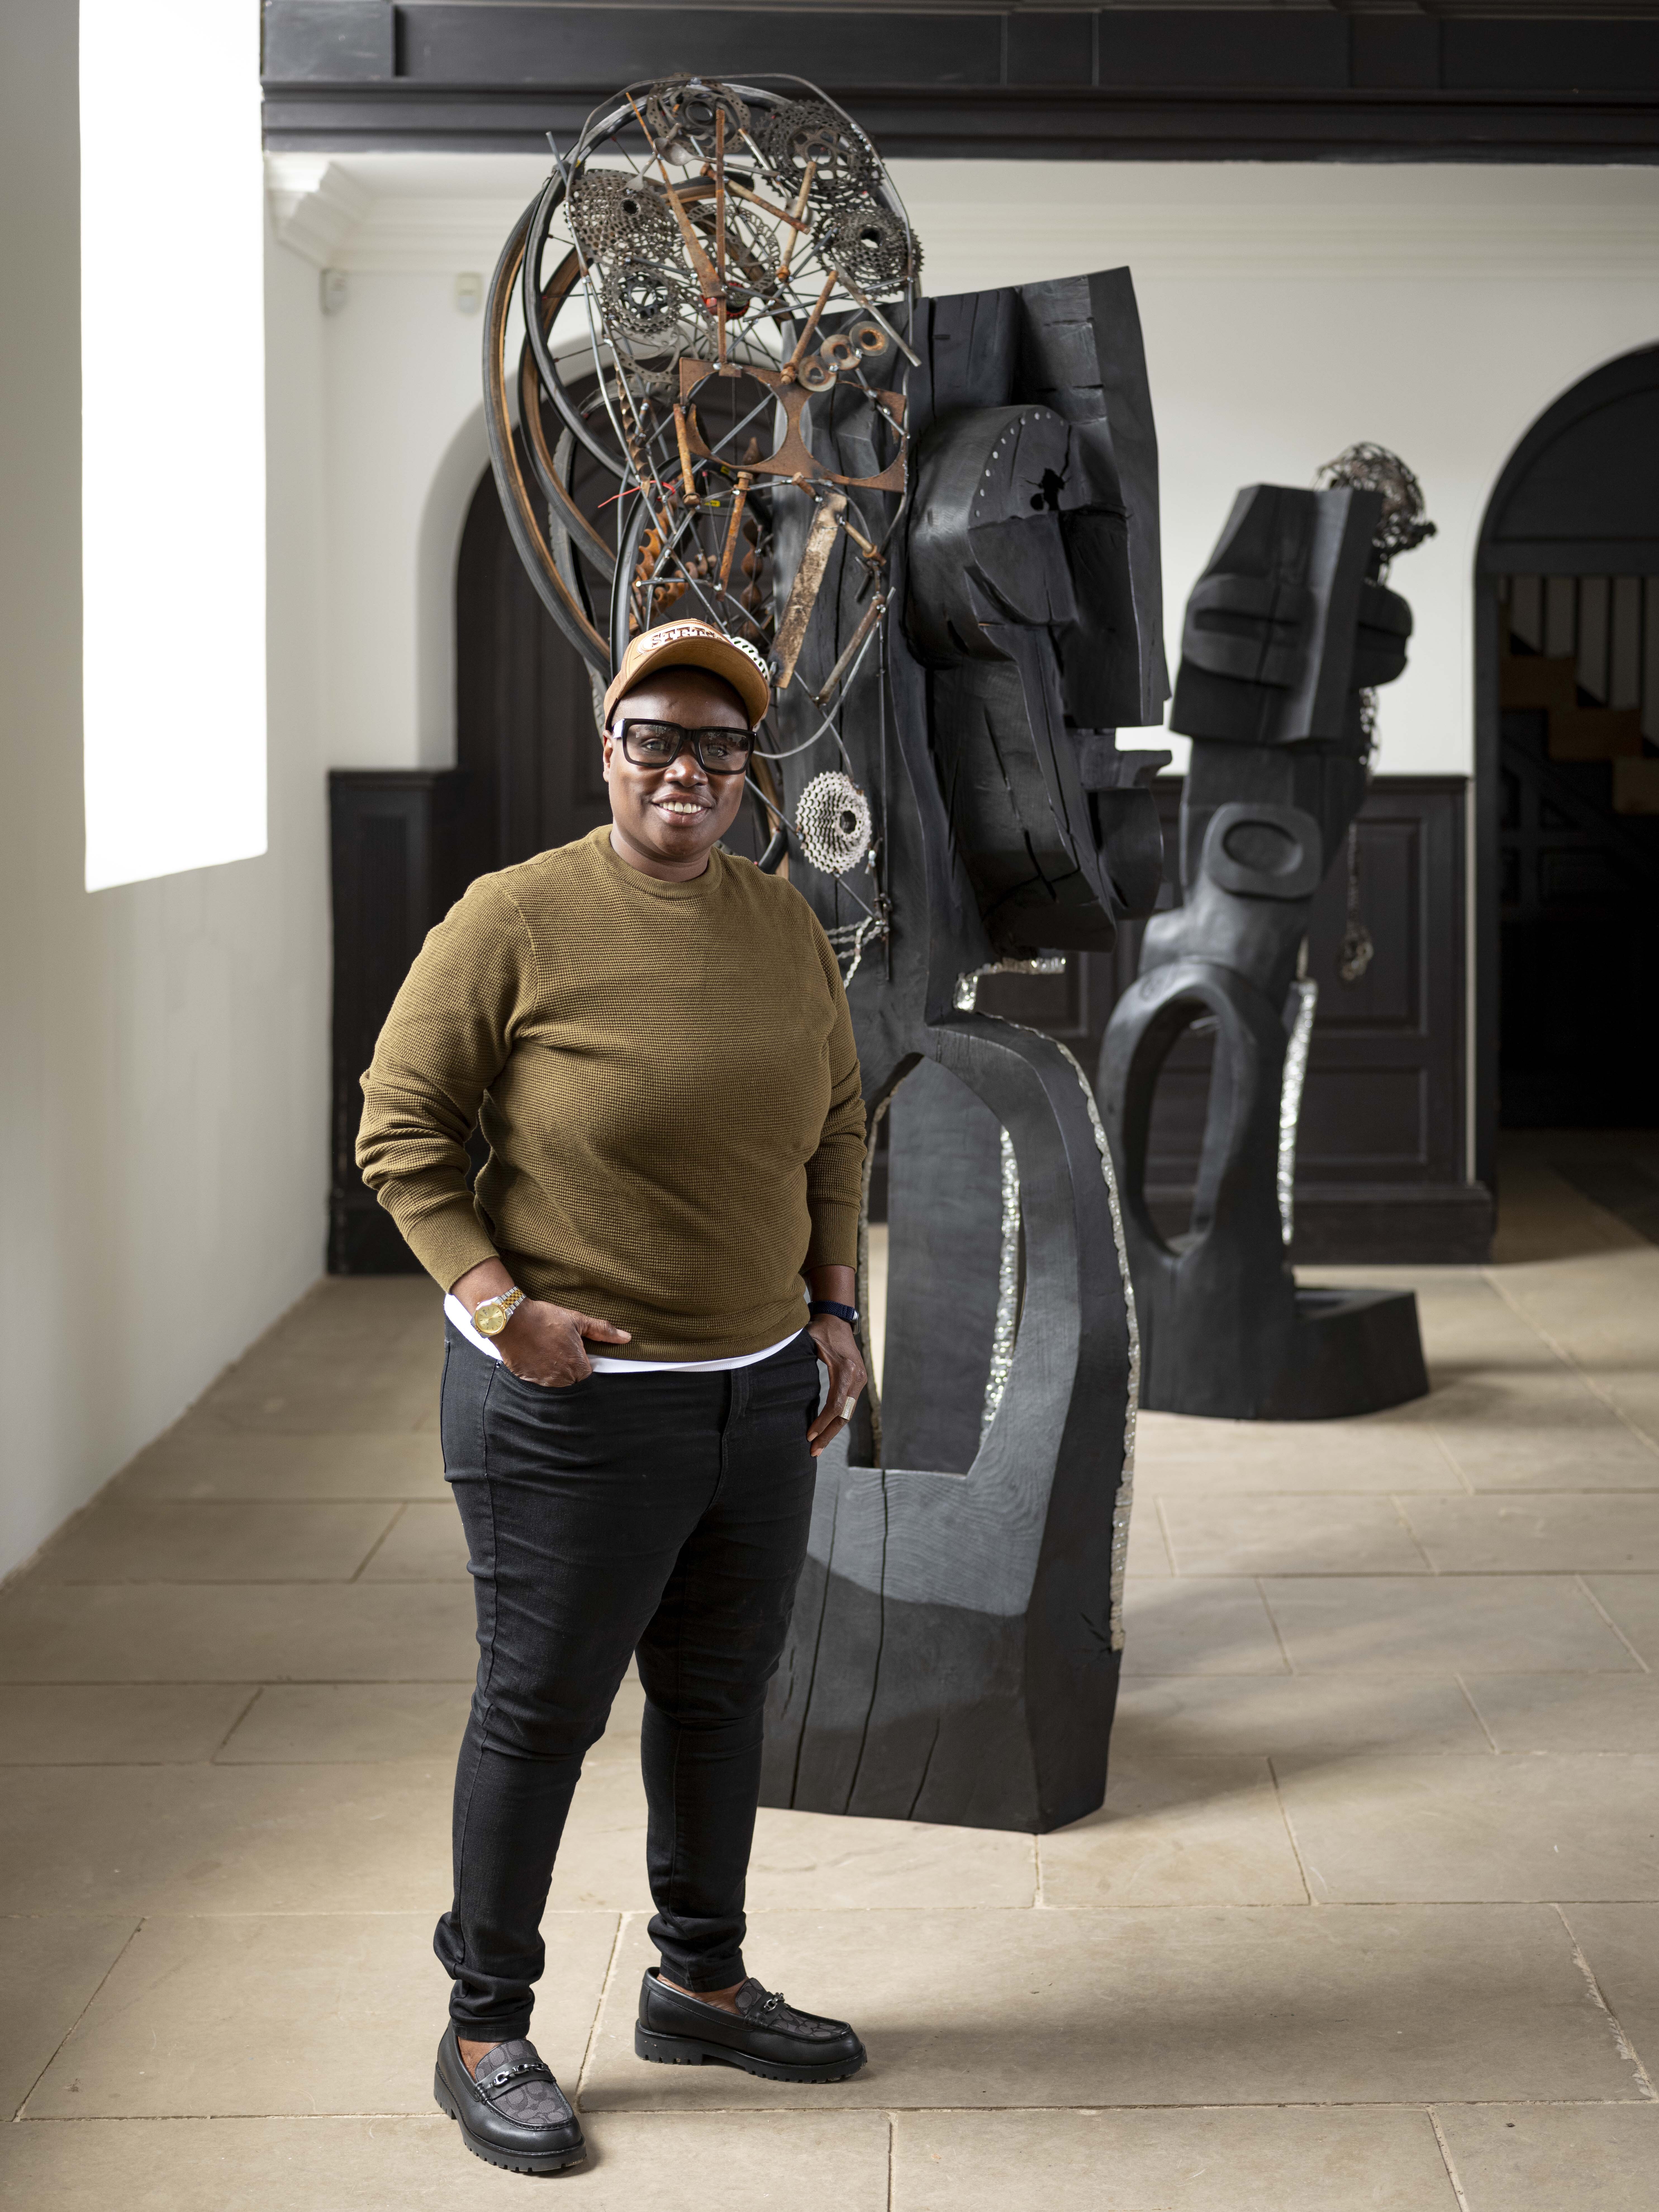 A black woman wearing a cap and glasses, stands in front of a carved wooden figure with her hands in her pockets.